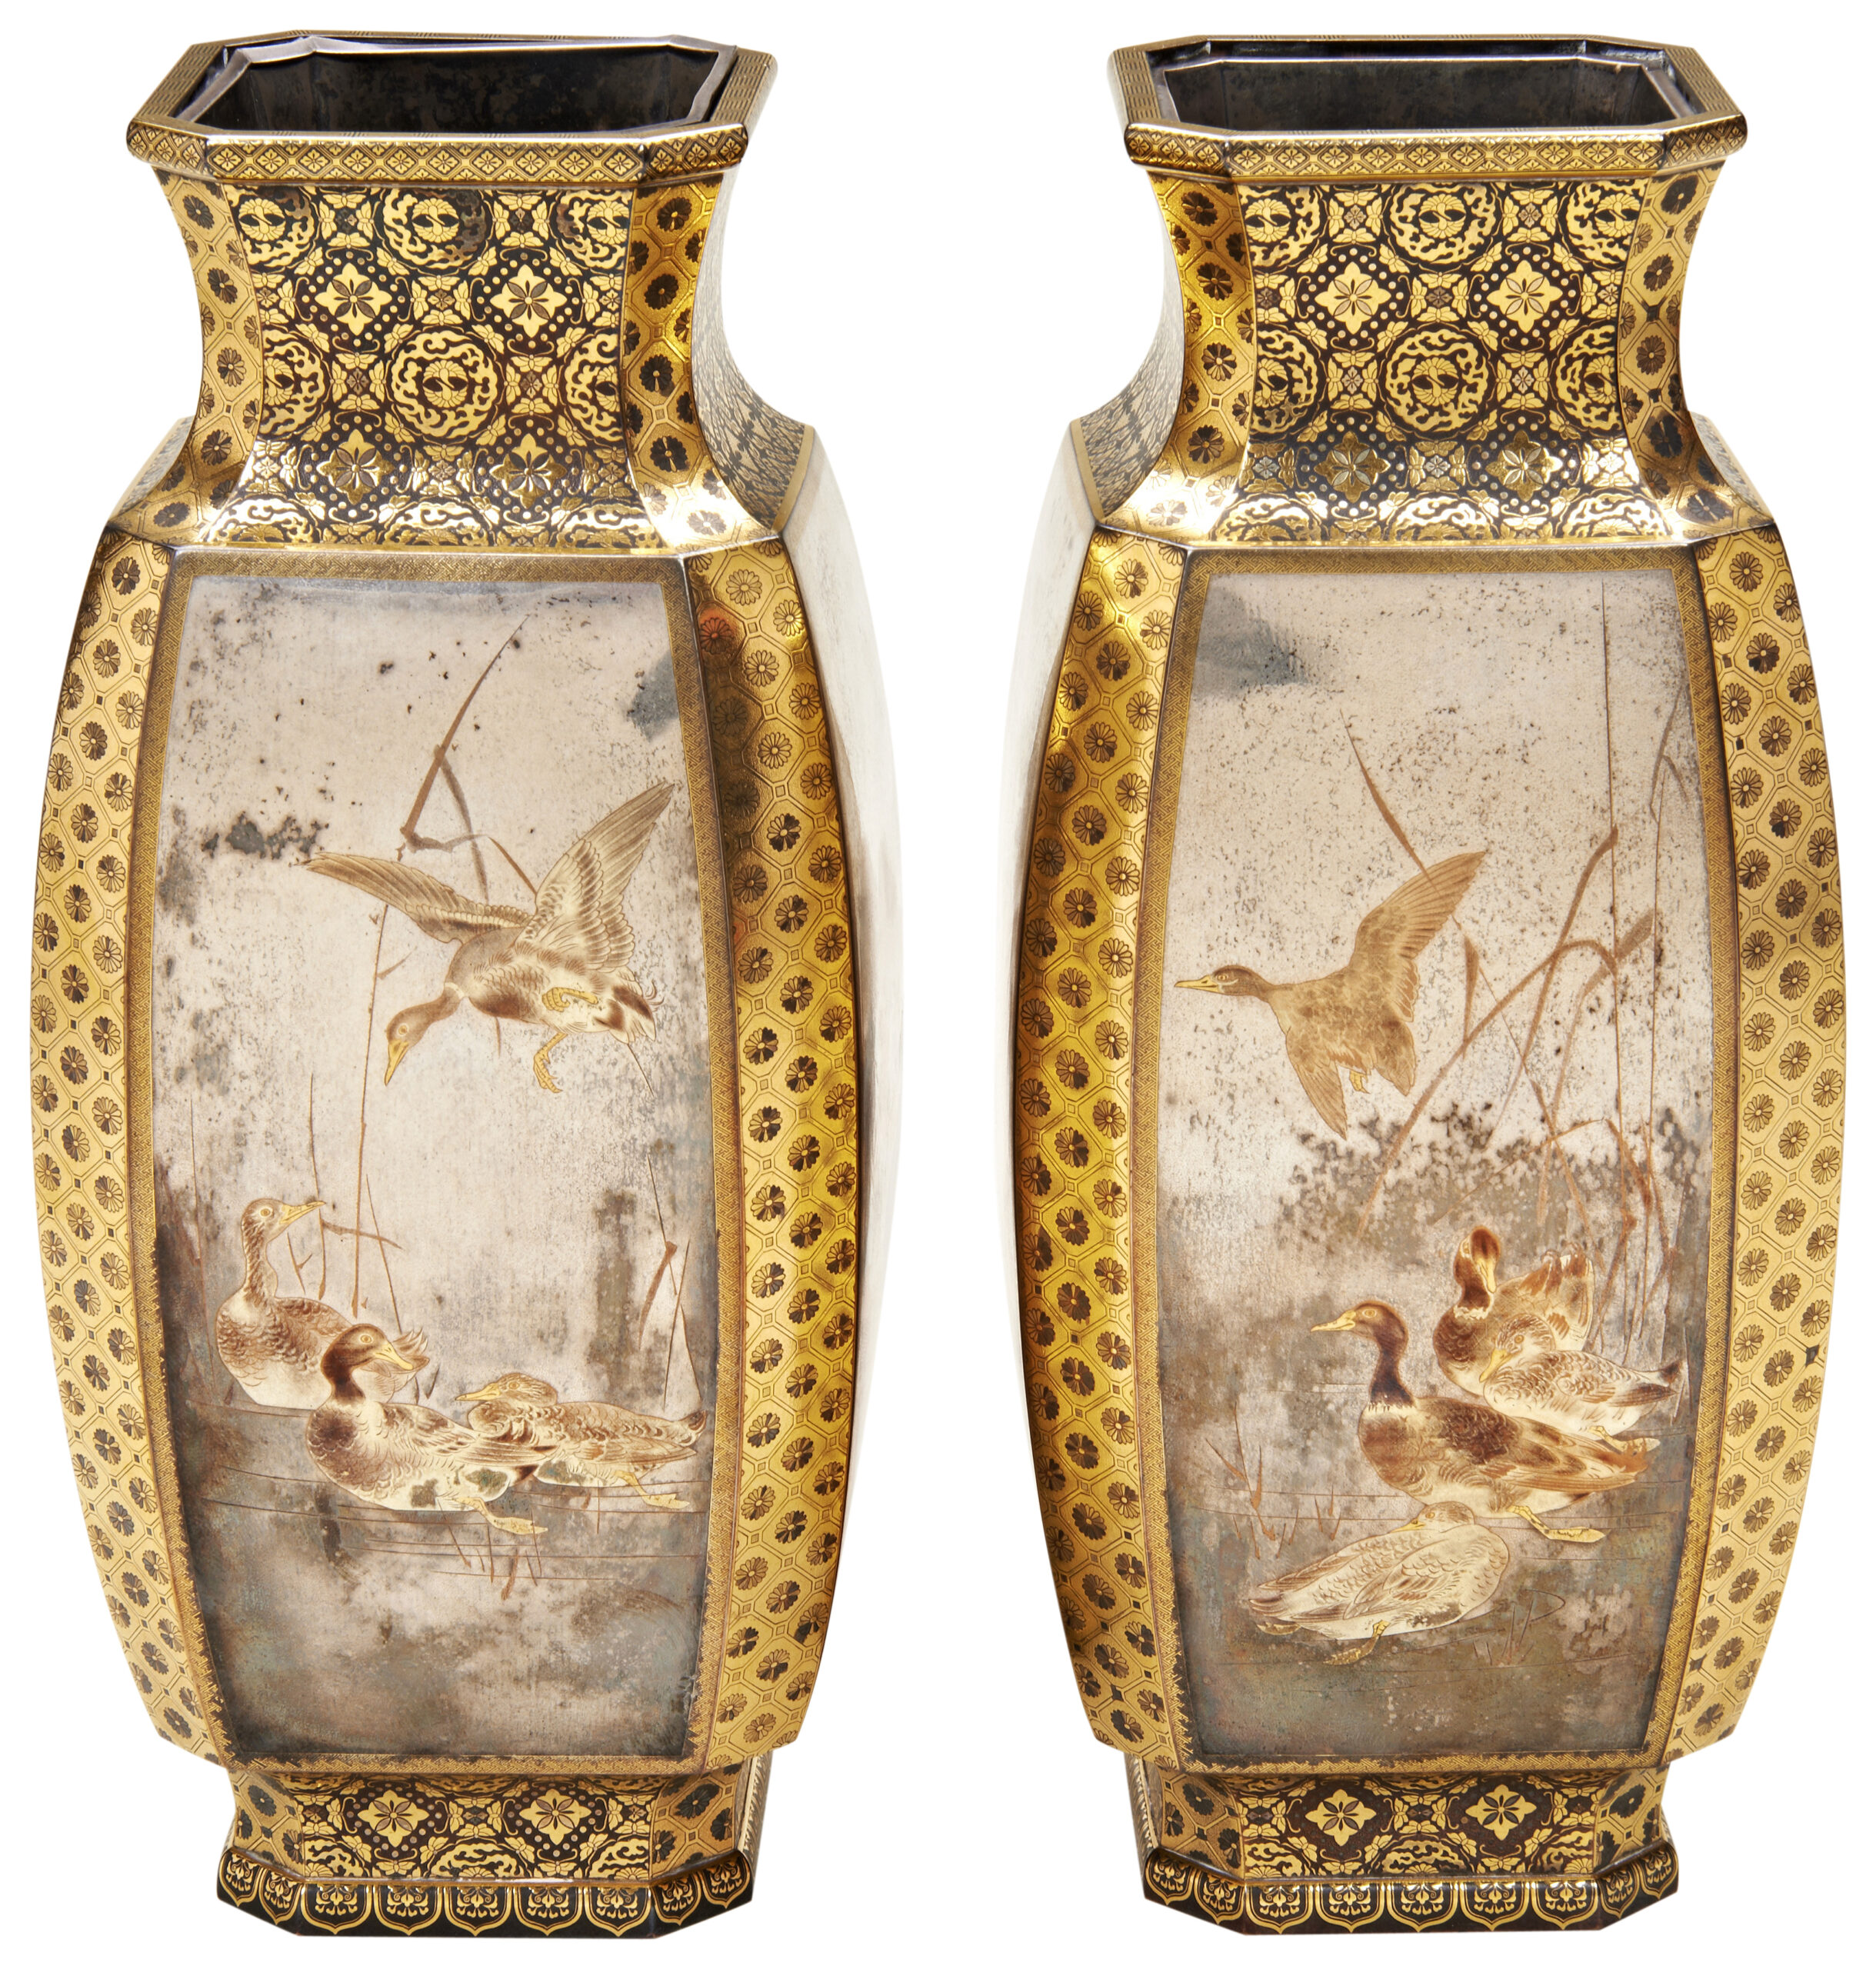 EXCEPTIONAL PAIR OF DAMASCENE BRONZE AND SILVER VASES